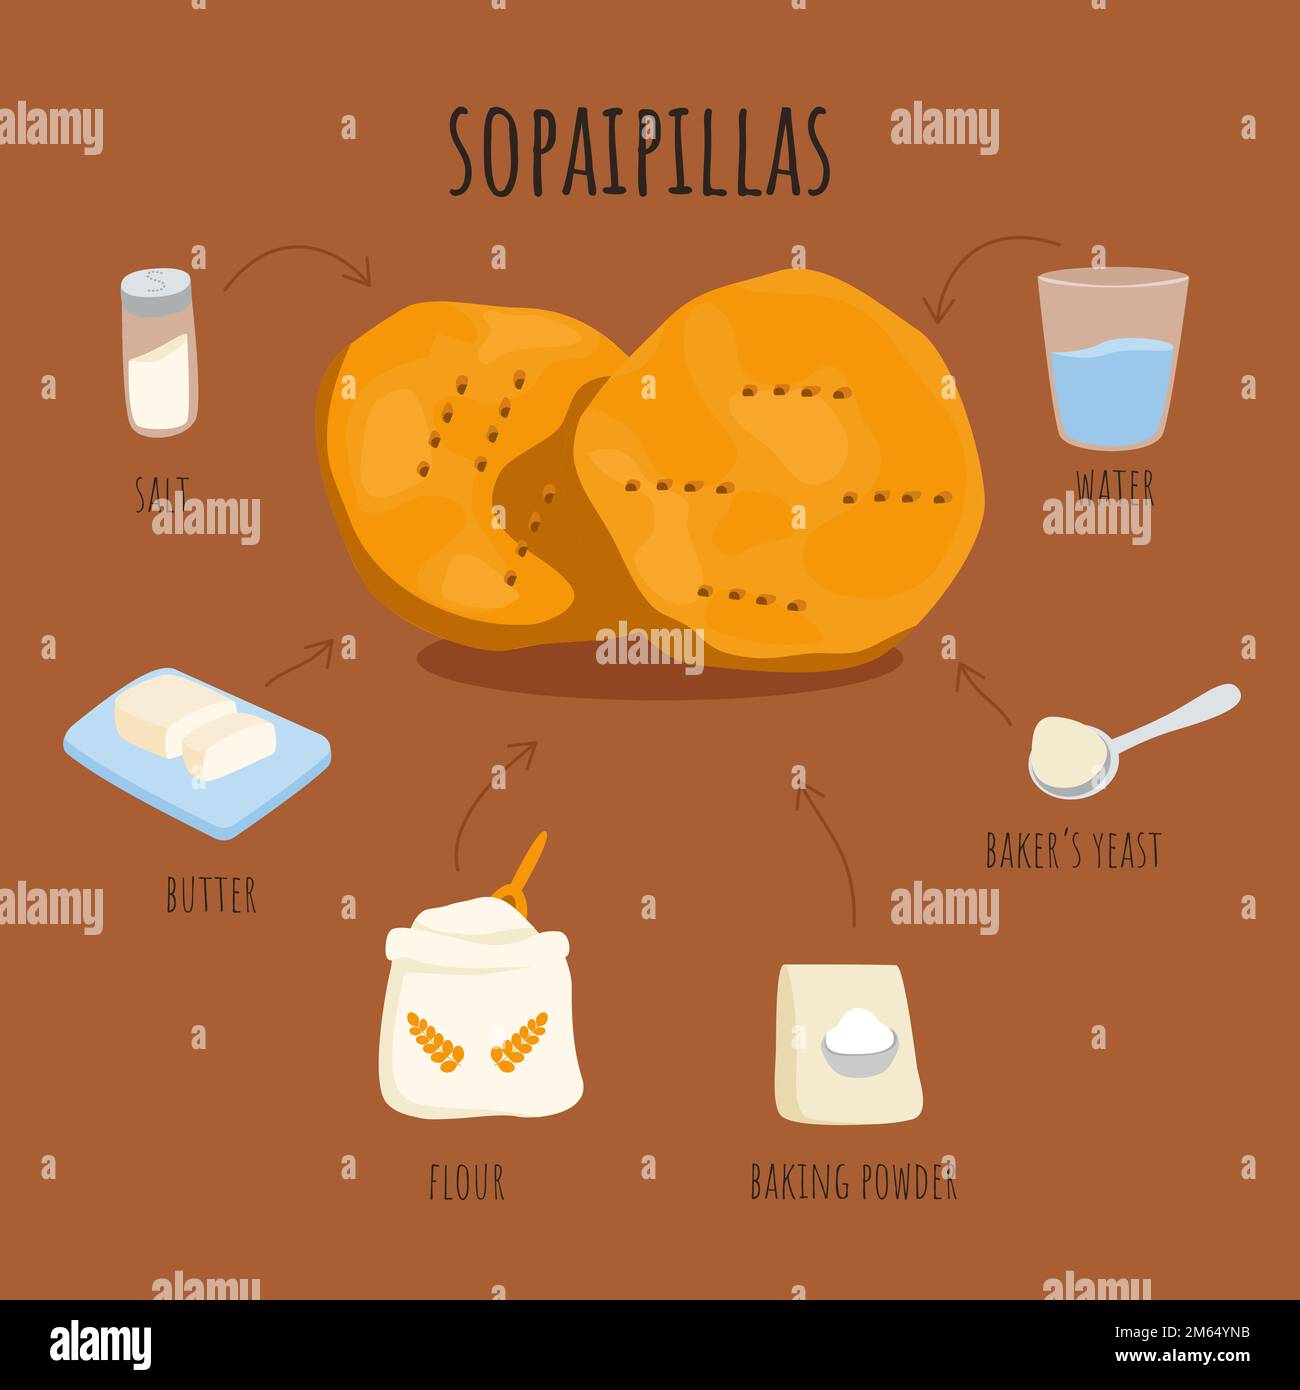 Chilean fried pastry sopaipillas ingredients poster. Latin american traditional cookies dough recipe. Local street fast food cute doodle card wall dec Stock Vector